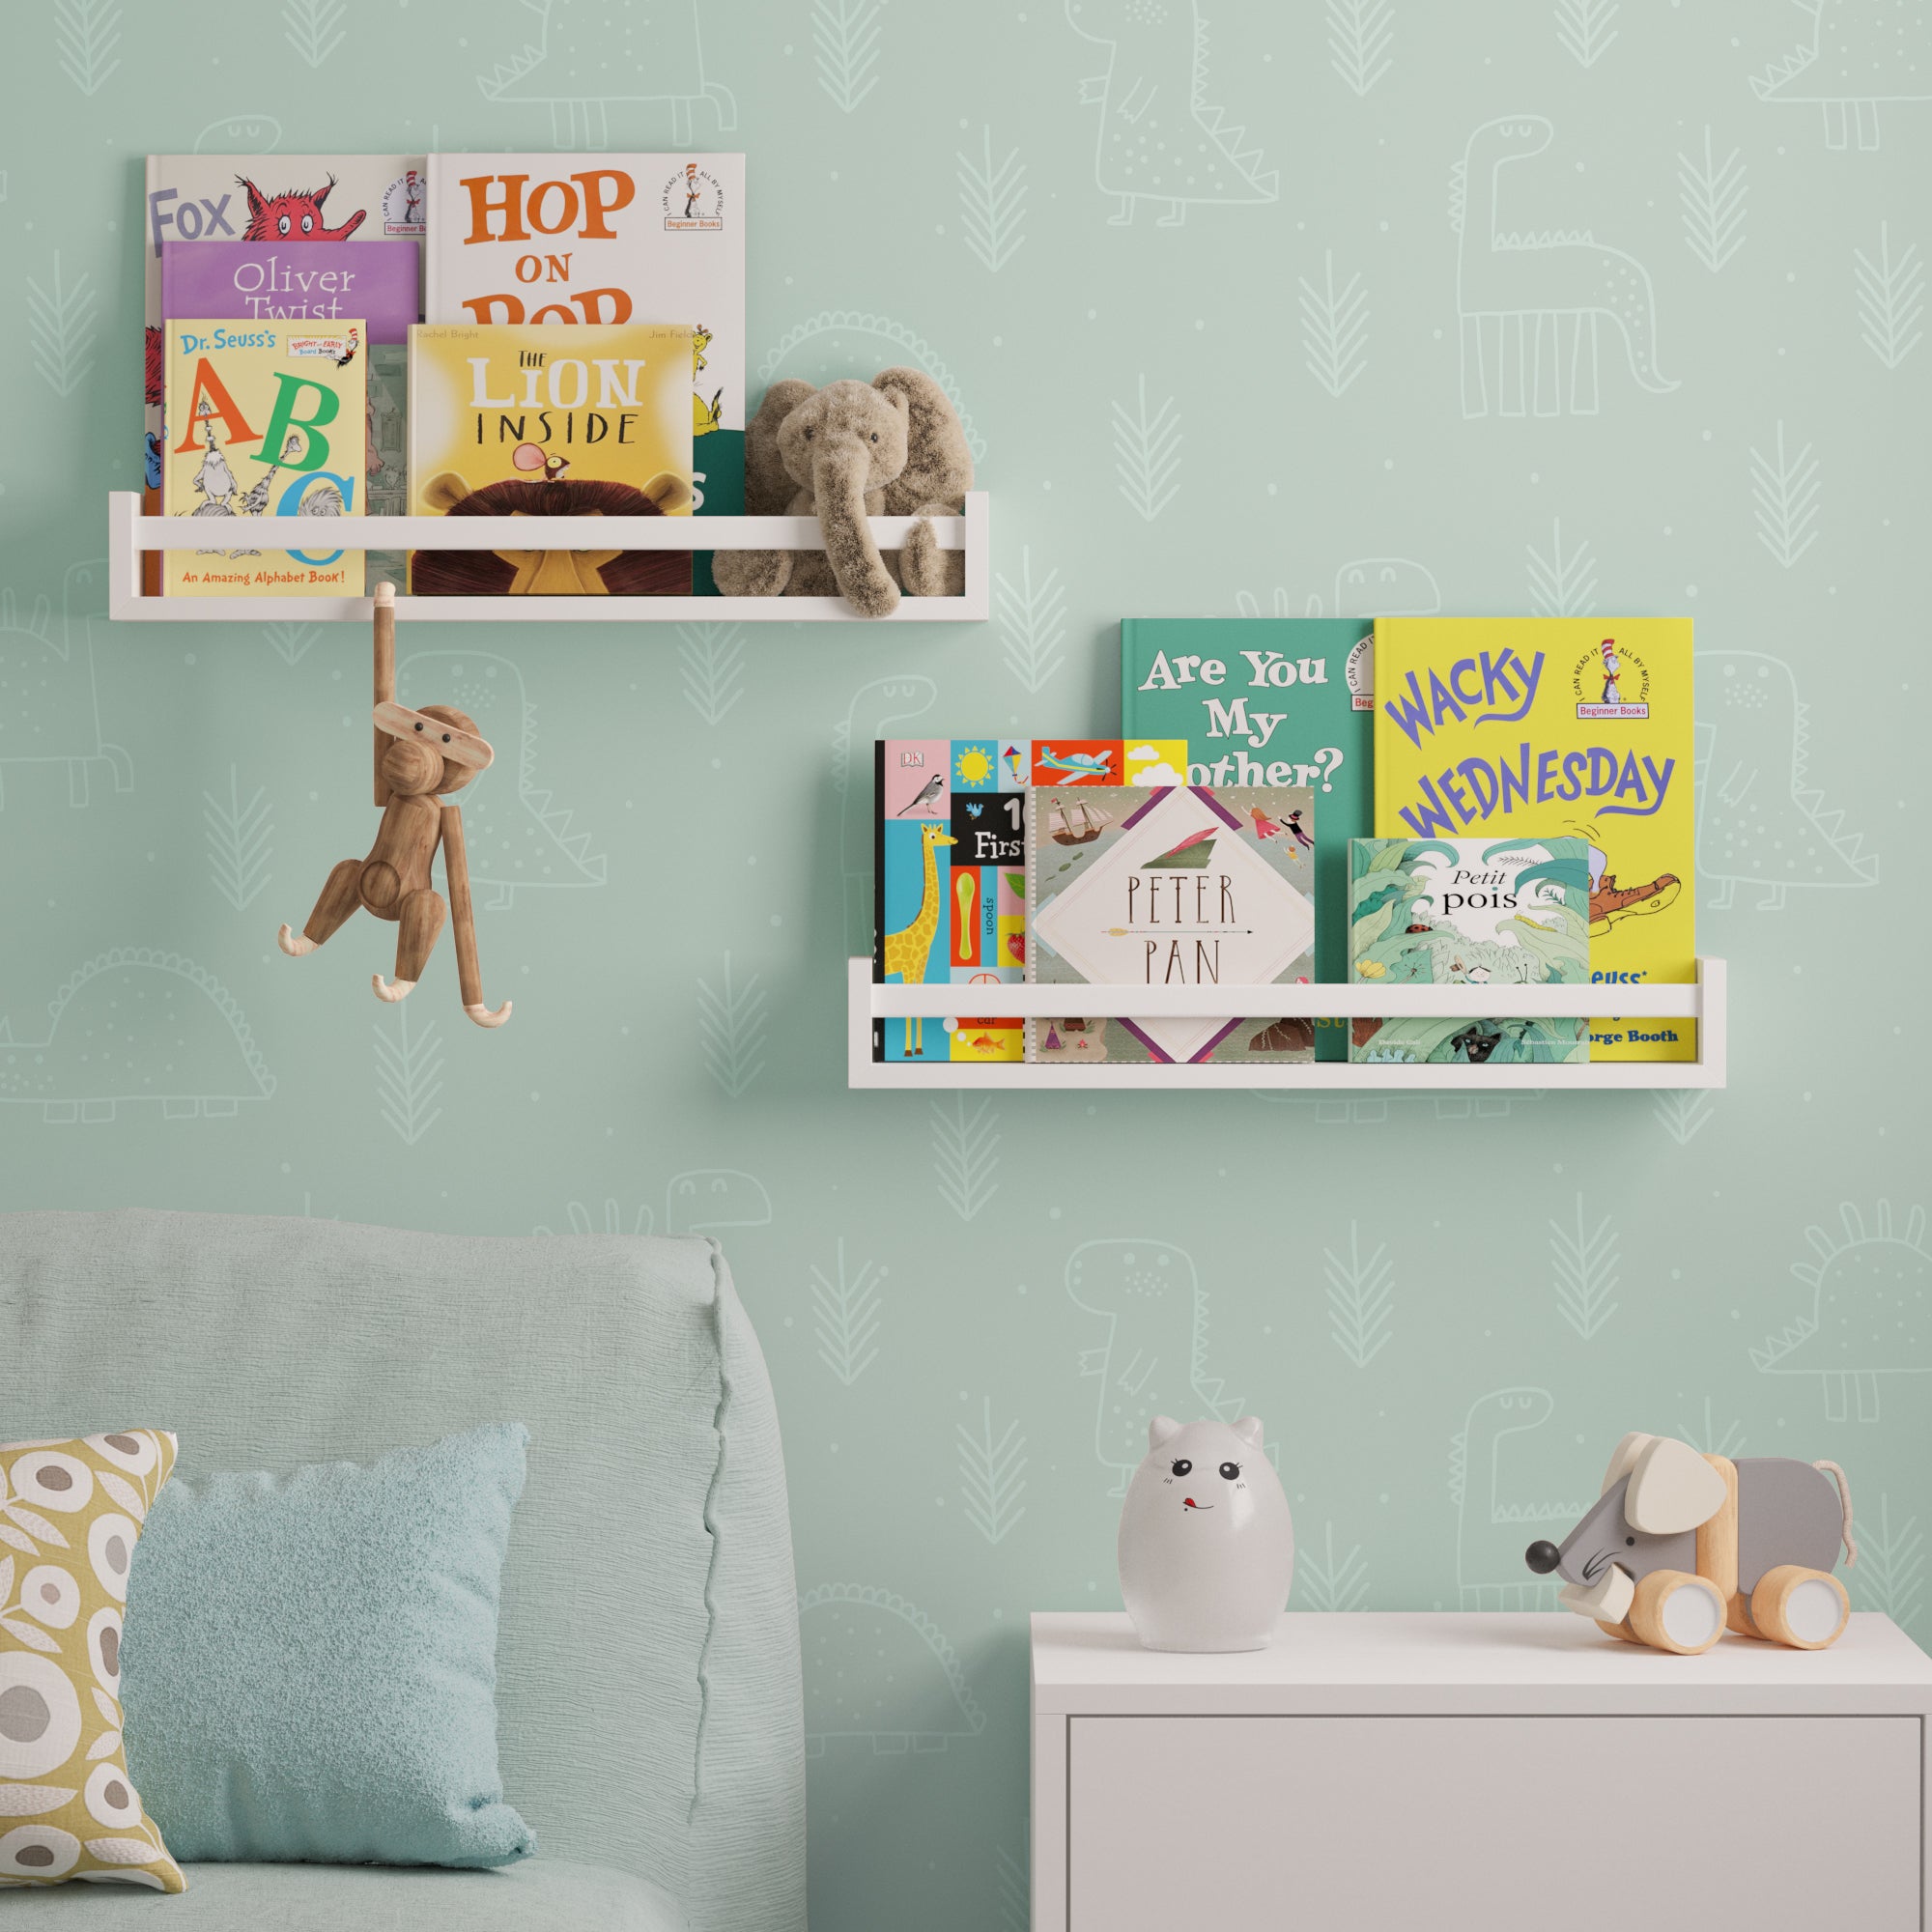 Two white wall mount nursery shelves on a light green wall, holding children's books and plush toys, with a playful wooden monkey hanging from one shelf, creating a charming, organized reading nook.